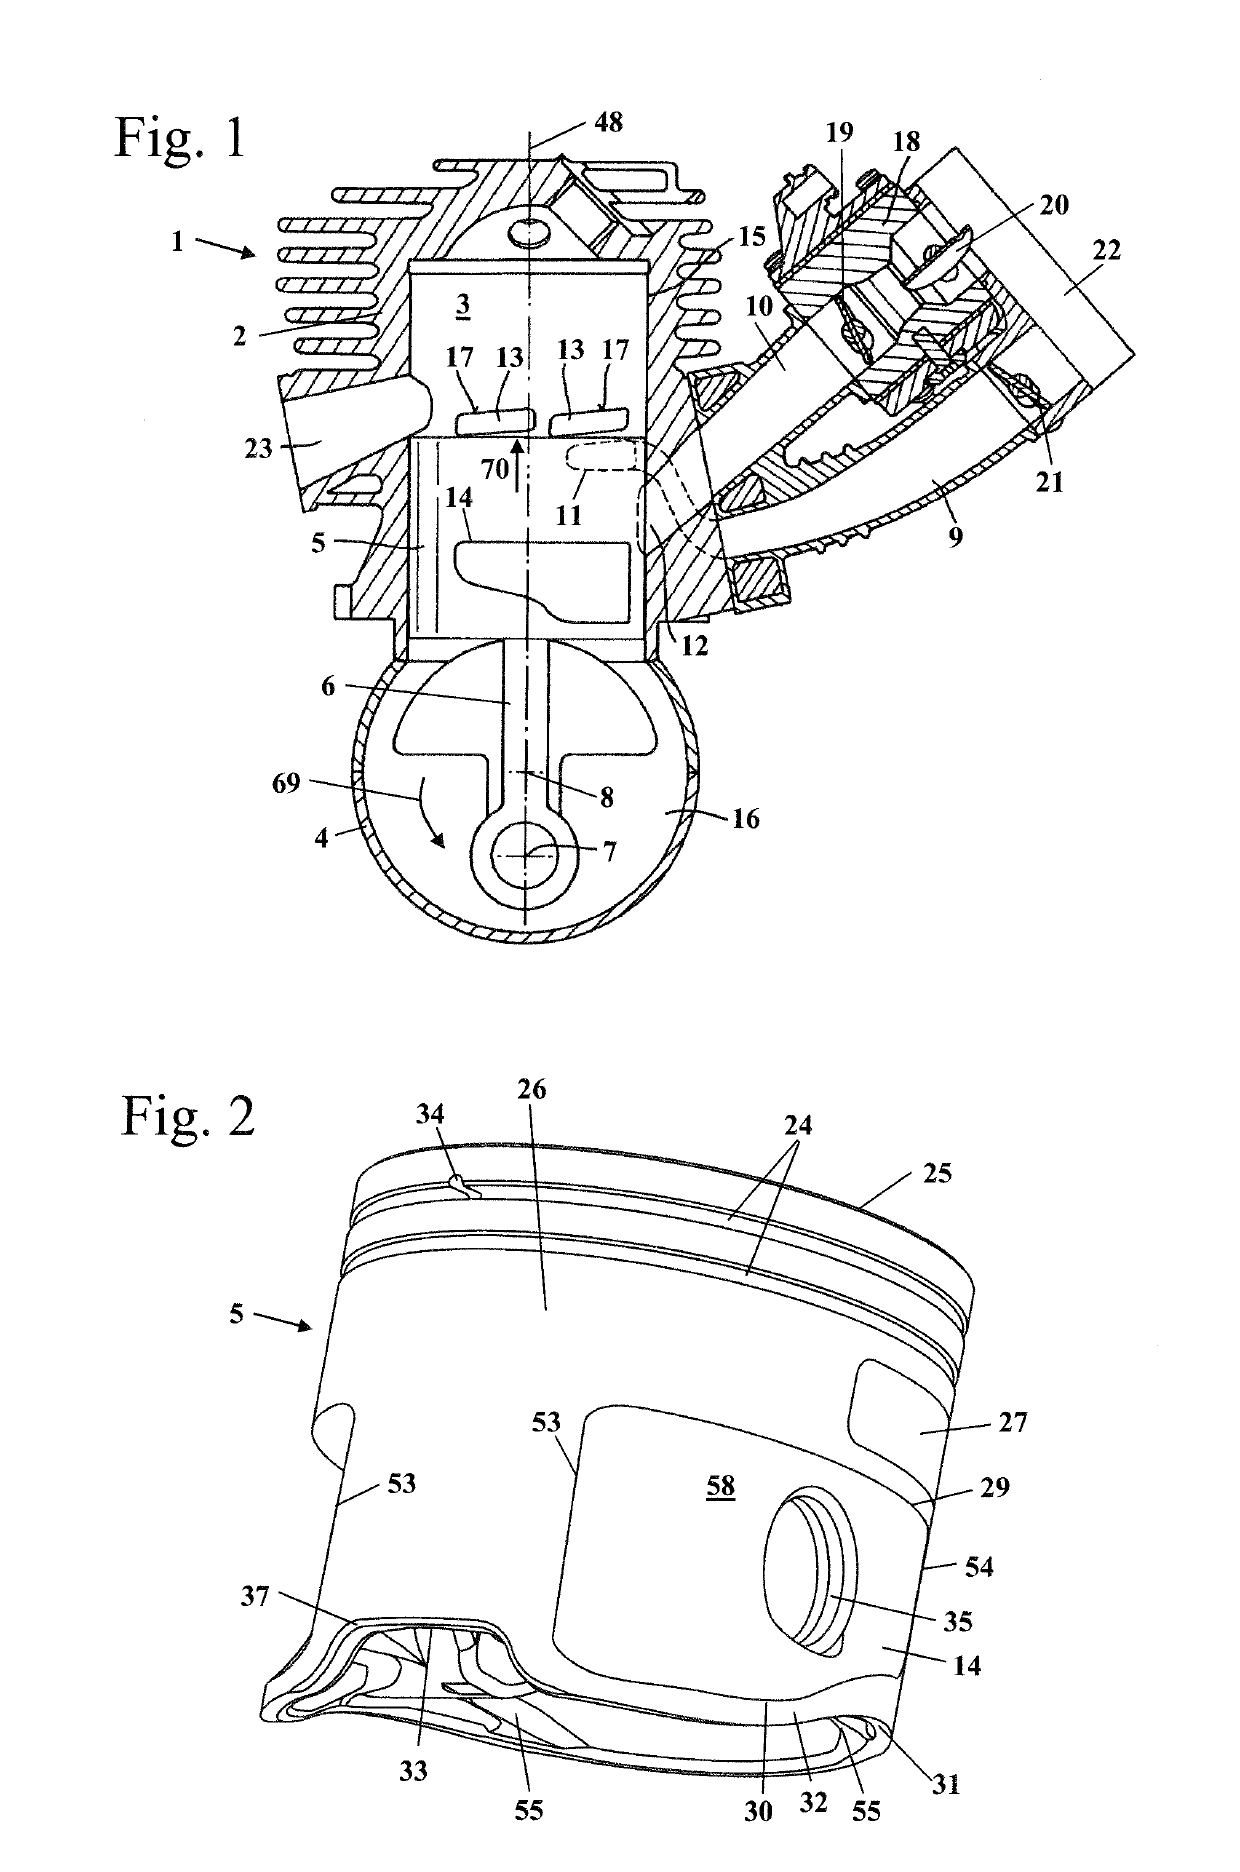 Piston for a two-stroke engine operating with advanced scavenging and a two-stroke engine